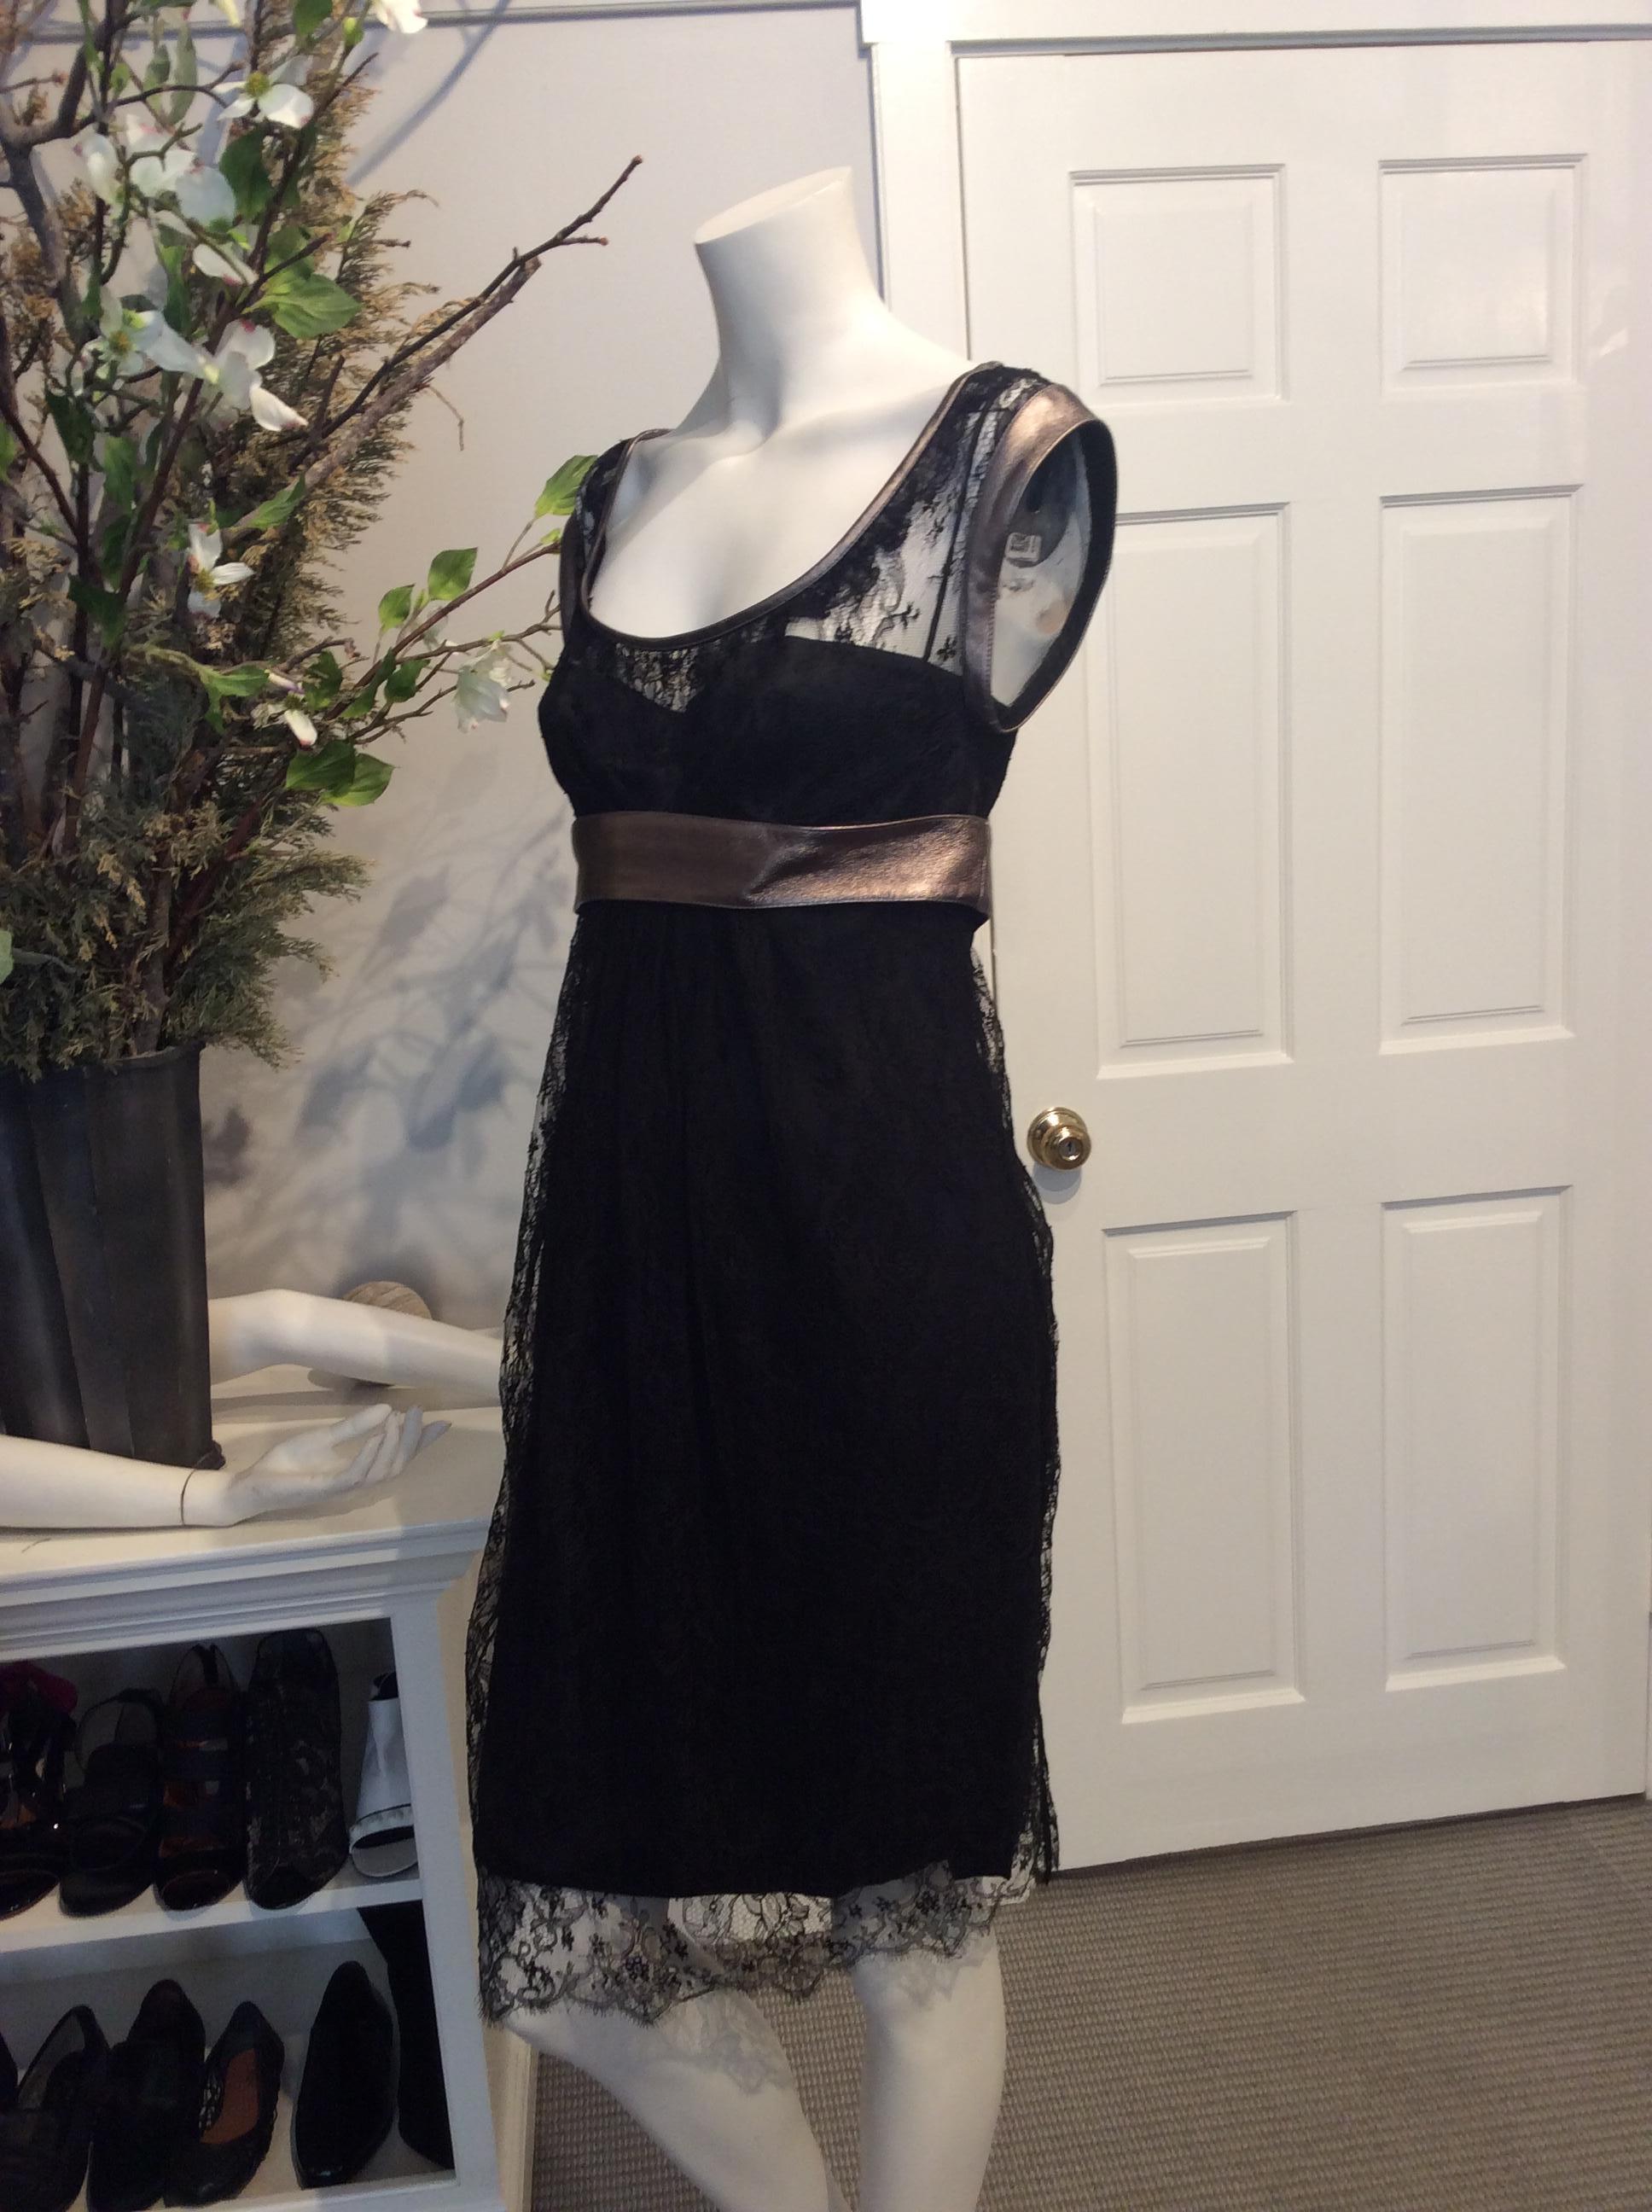 Dolce and Gabbana Black Lace Dress with Gunmetal Leather Trim and Belt Sz42/Us6 In Excellent Condition For Sale In San Francisco, CA